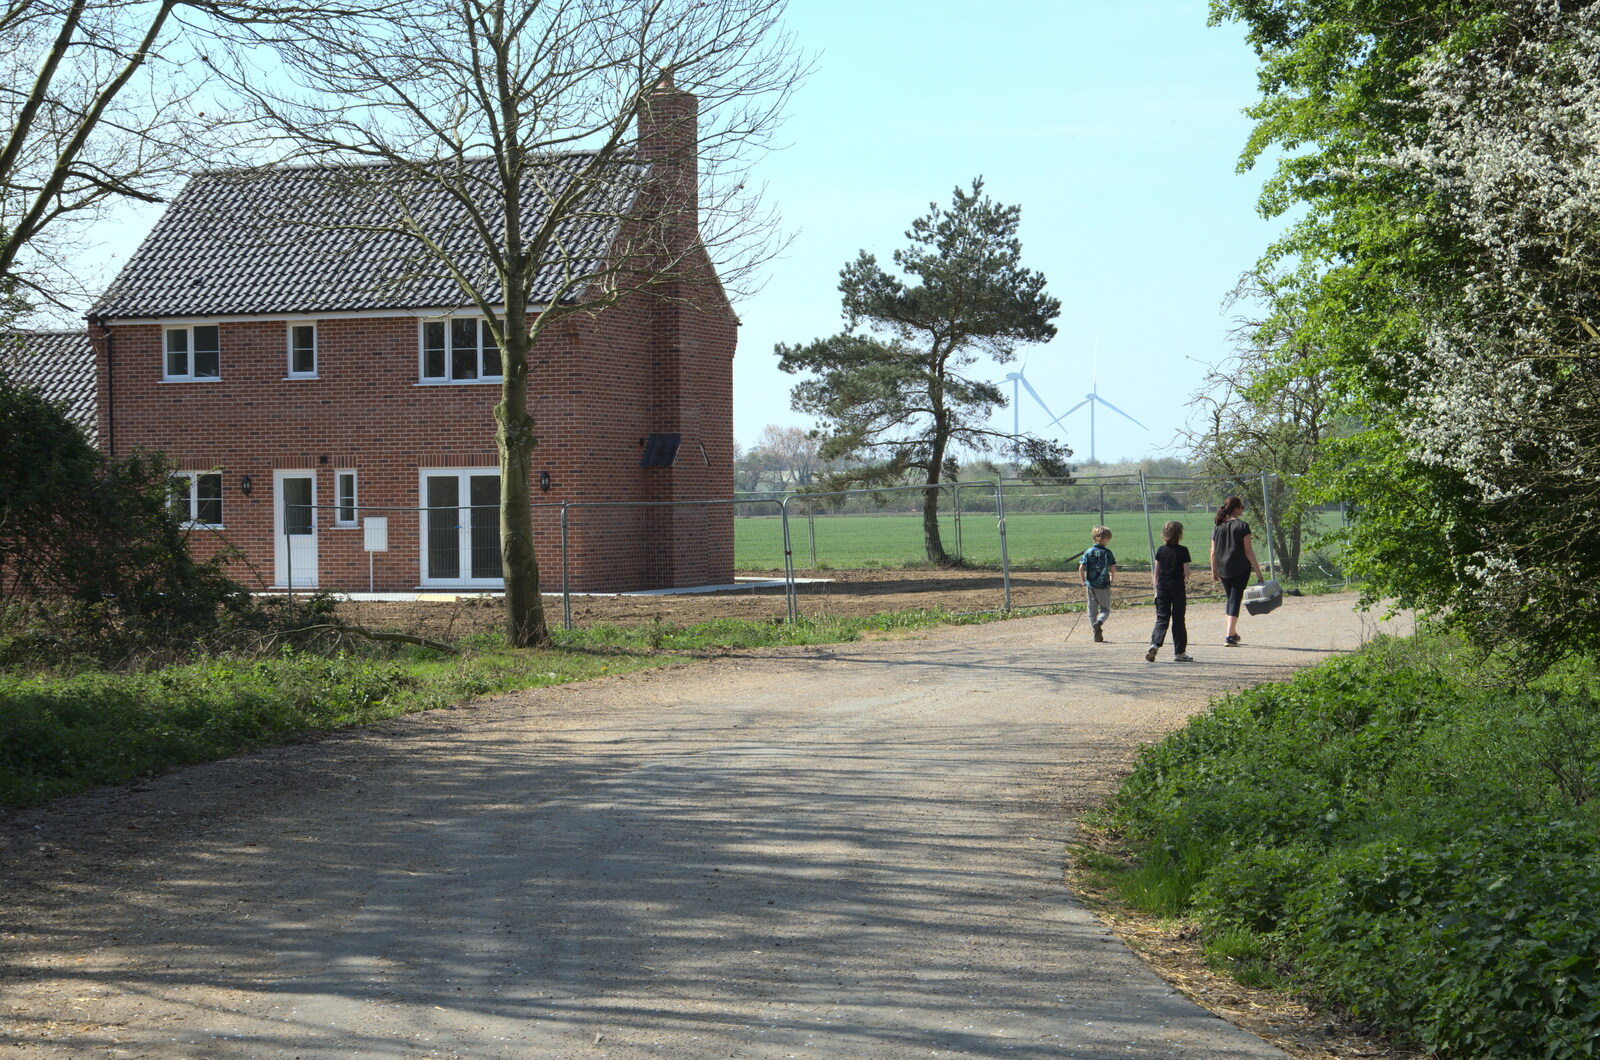 The new build near the chicken farm from A Weekend Camping Trip in the Garden, Brome, Suffolk - 11th April 2020